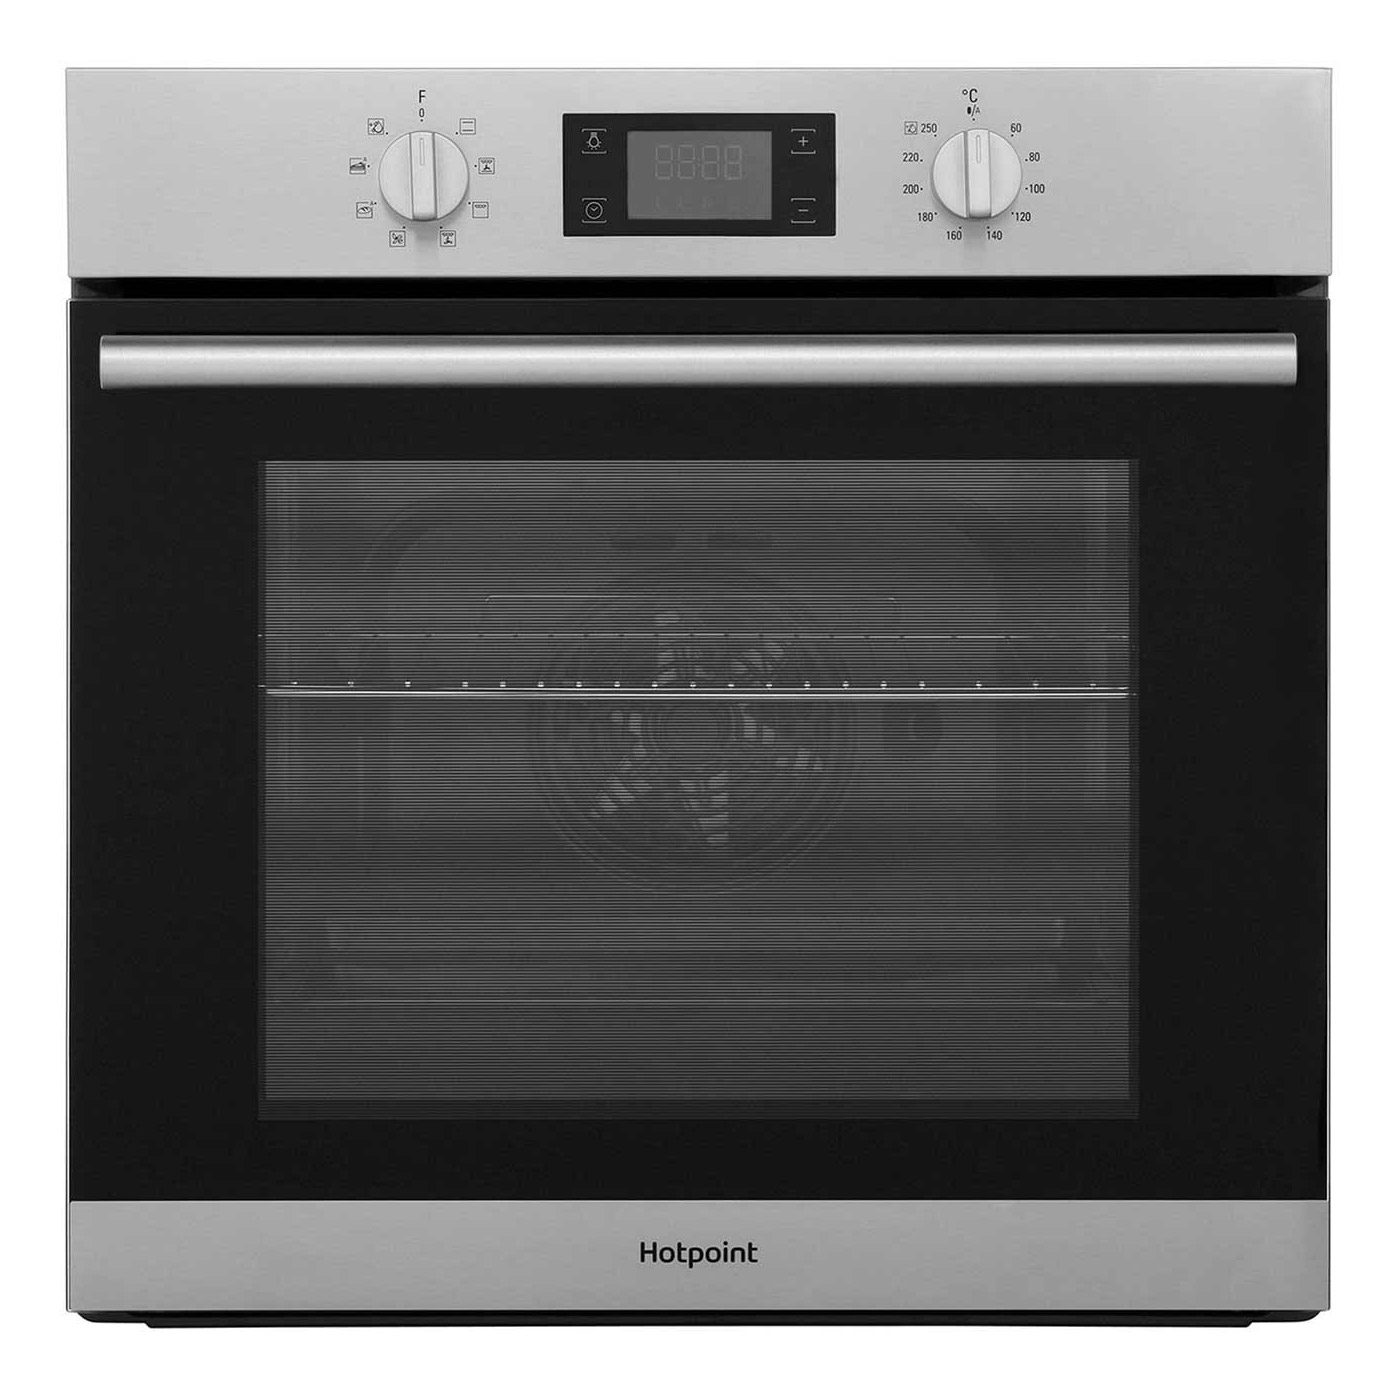 Image of Hotpoint SA2540HIX Built In Electric Single Oven in St Steel 66L